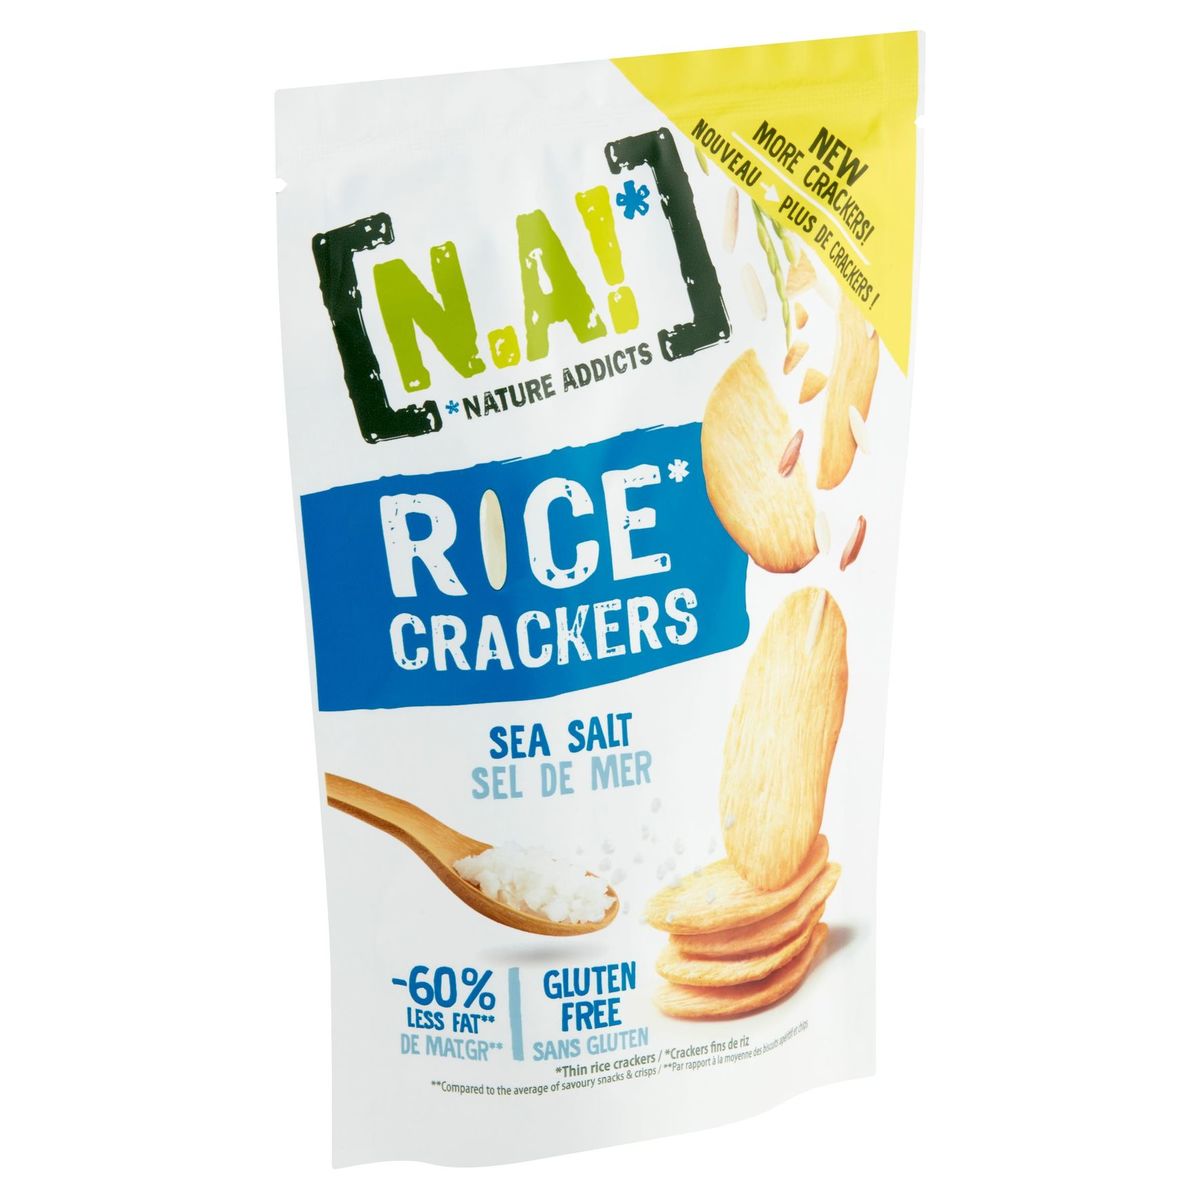 N.A! Nature Addicts Rice Crackers Sea 85 g